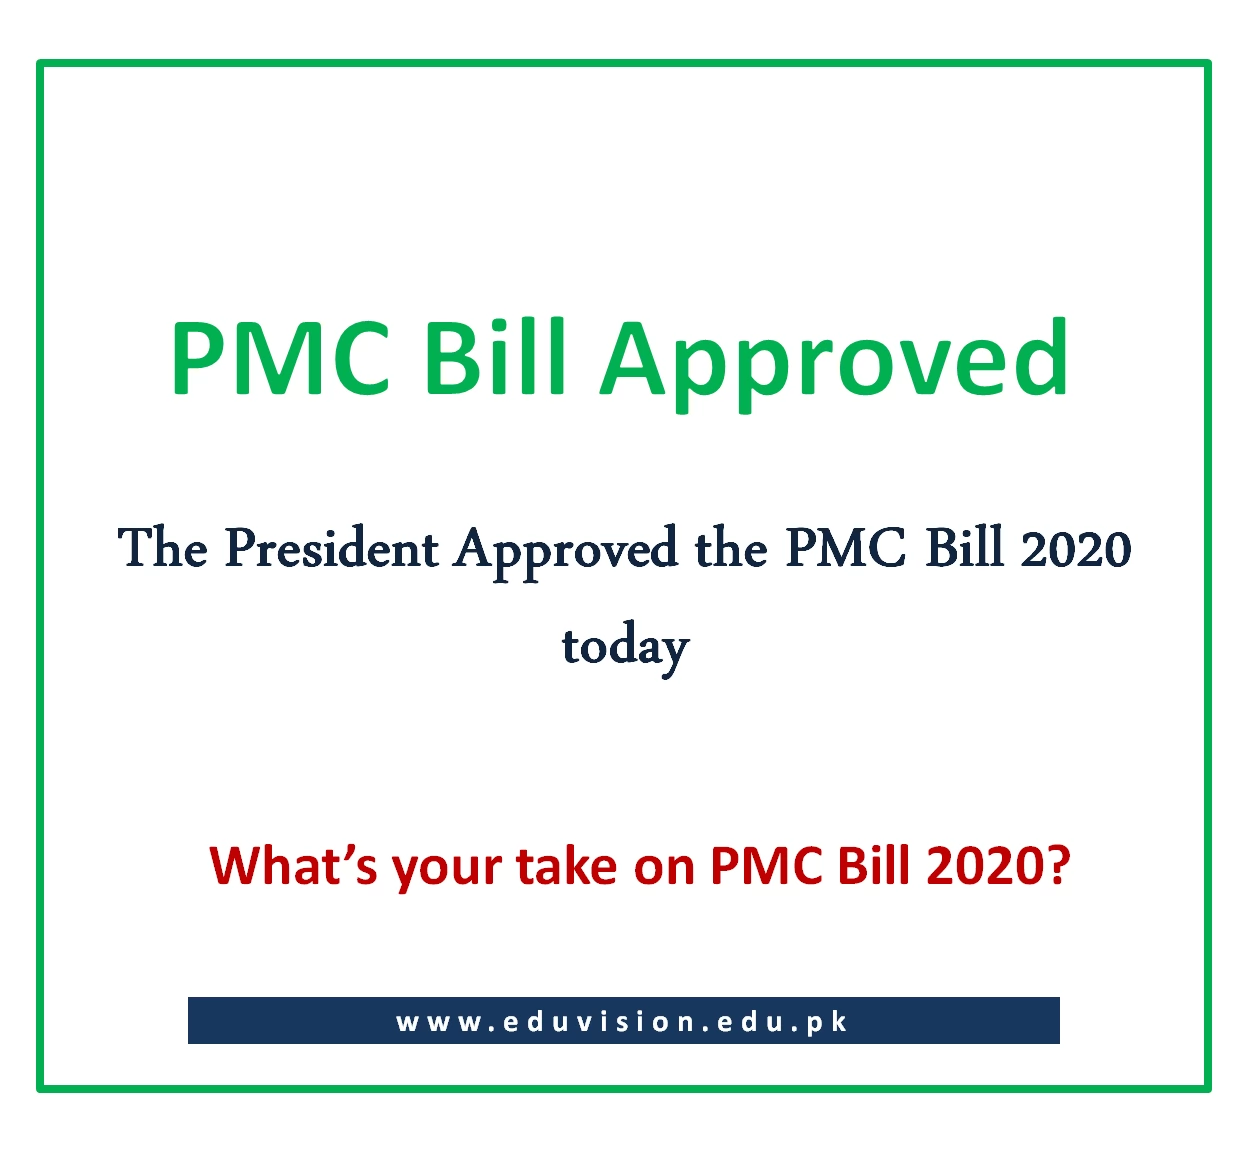 President approved PMC Bill 2020